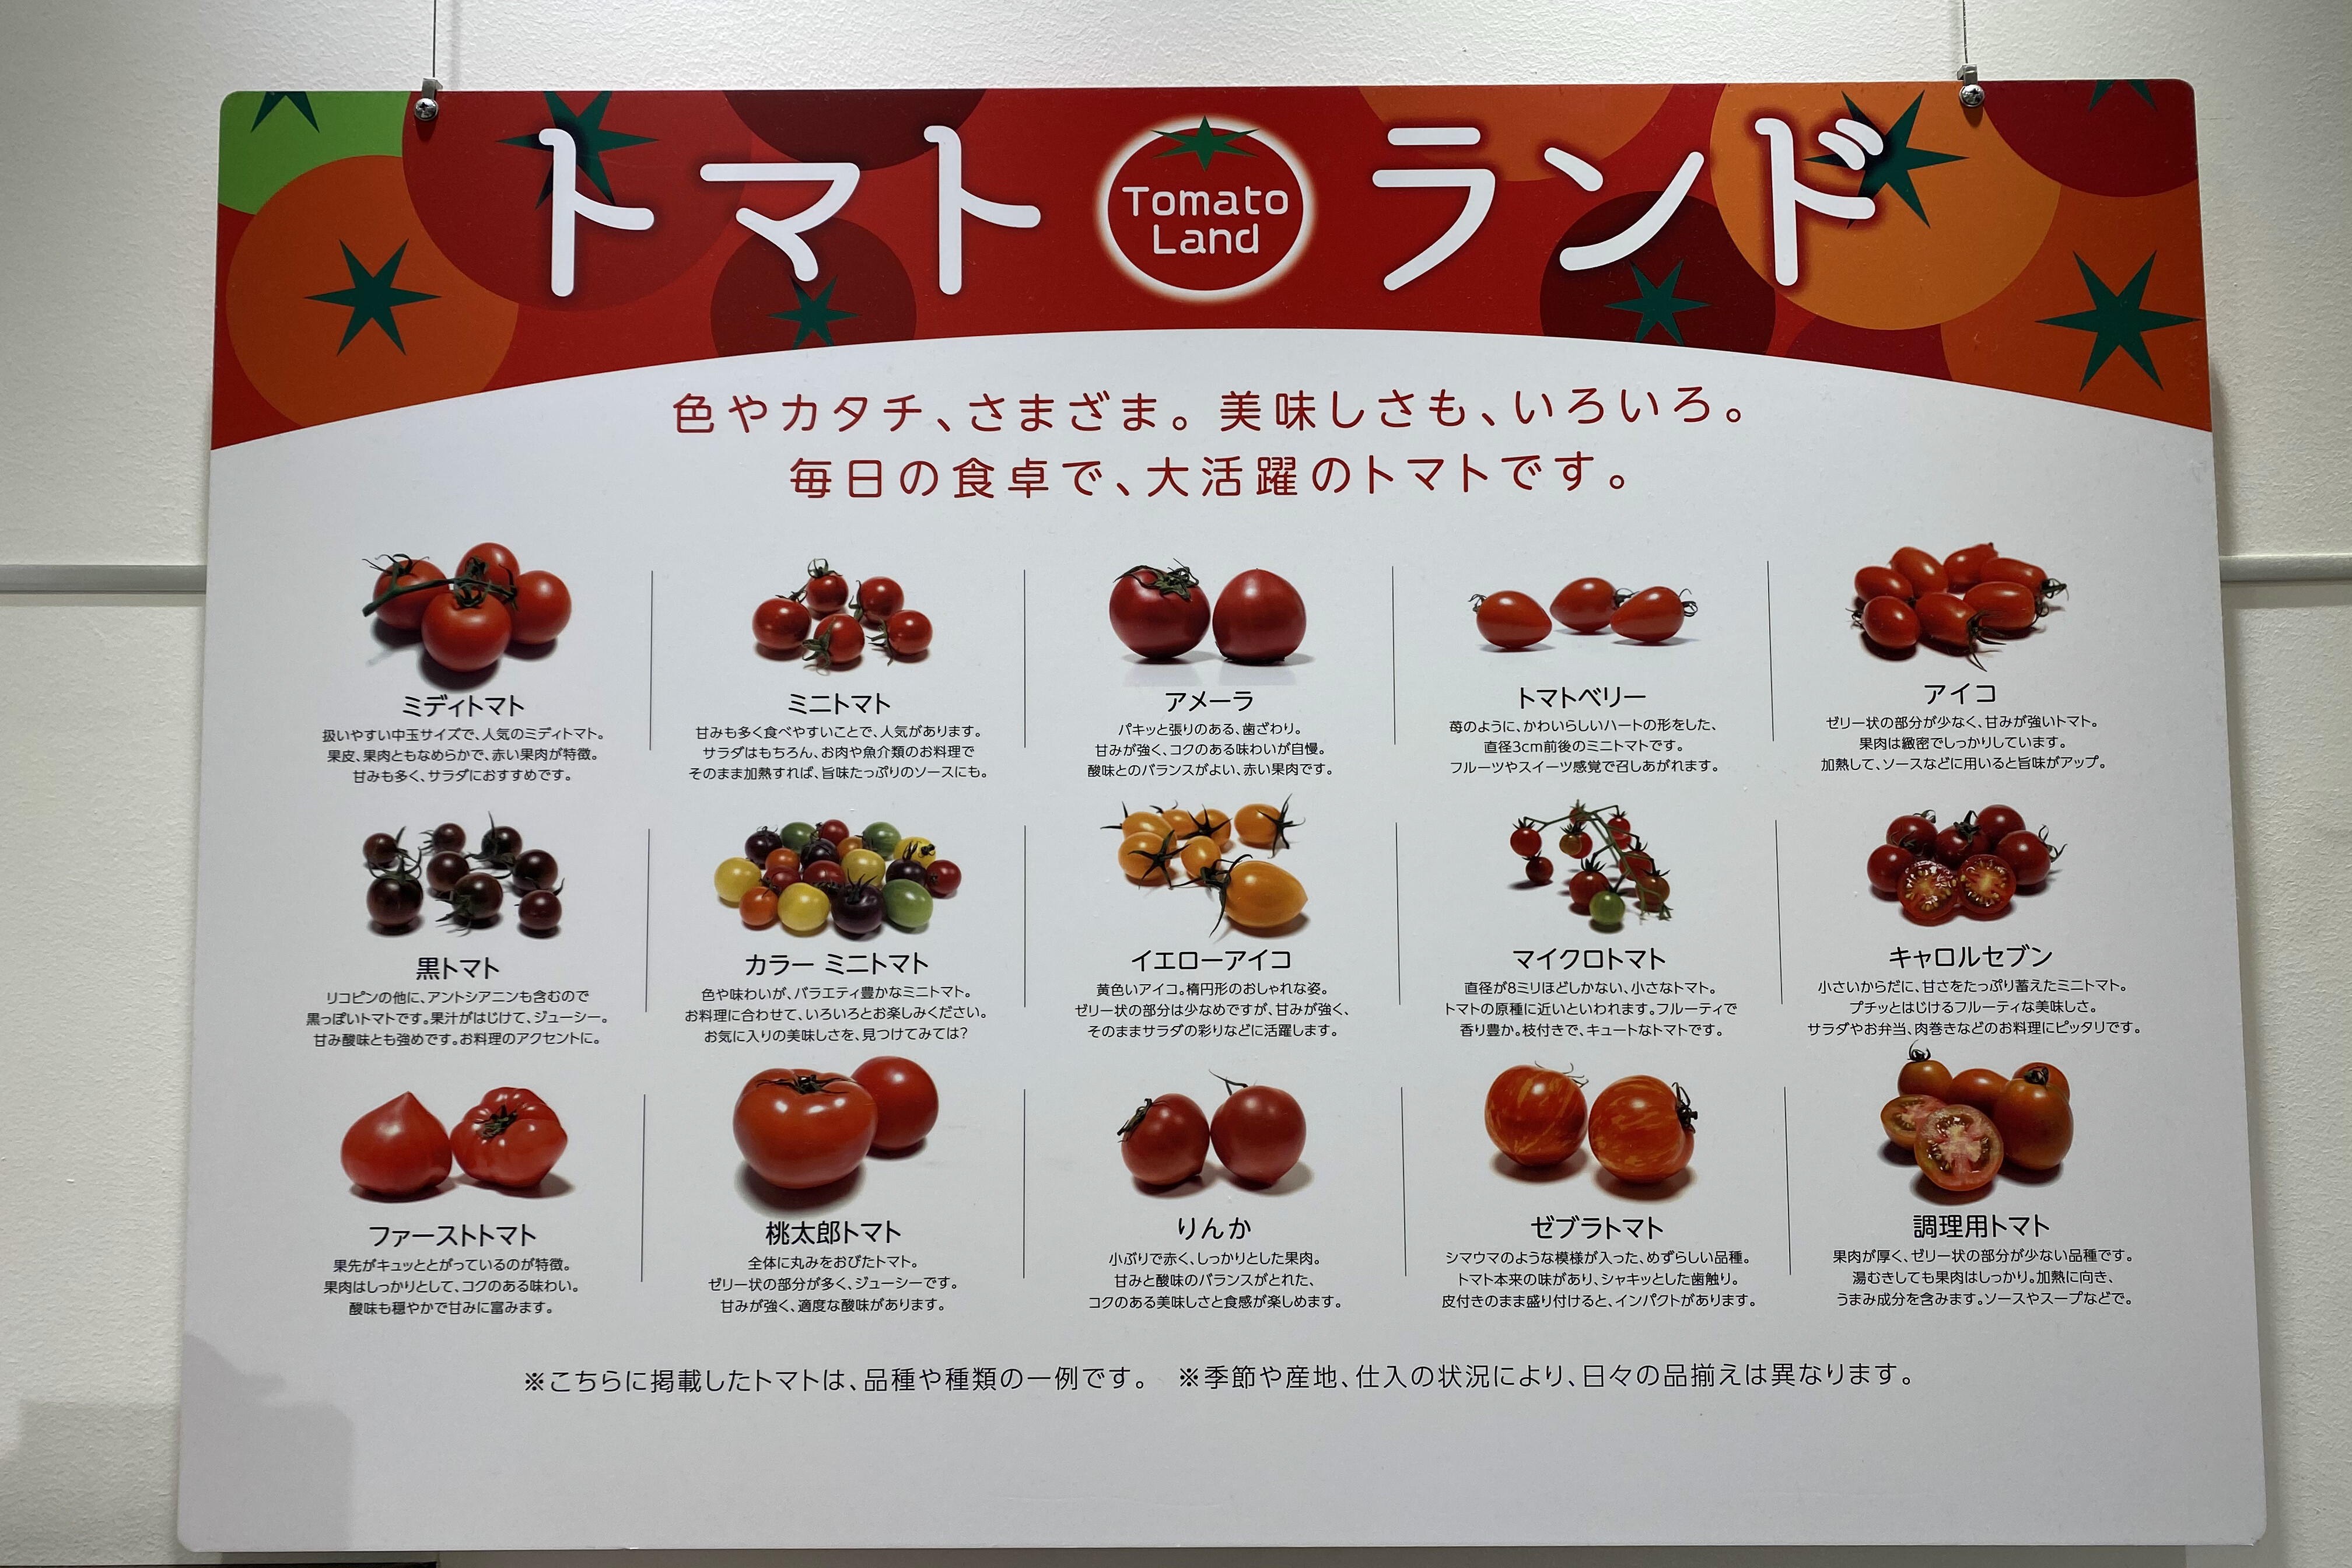 Commom tomato you can get in Japan